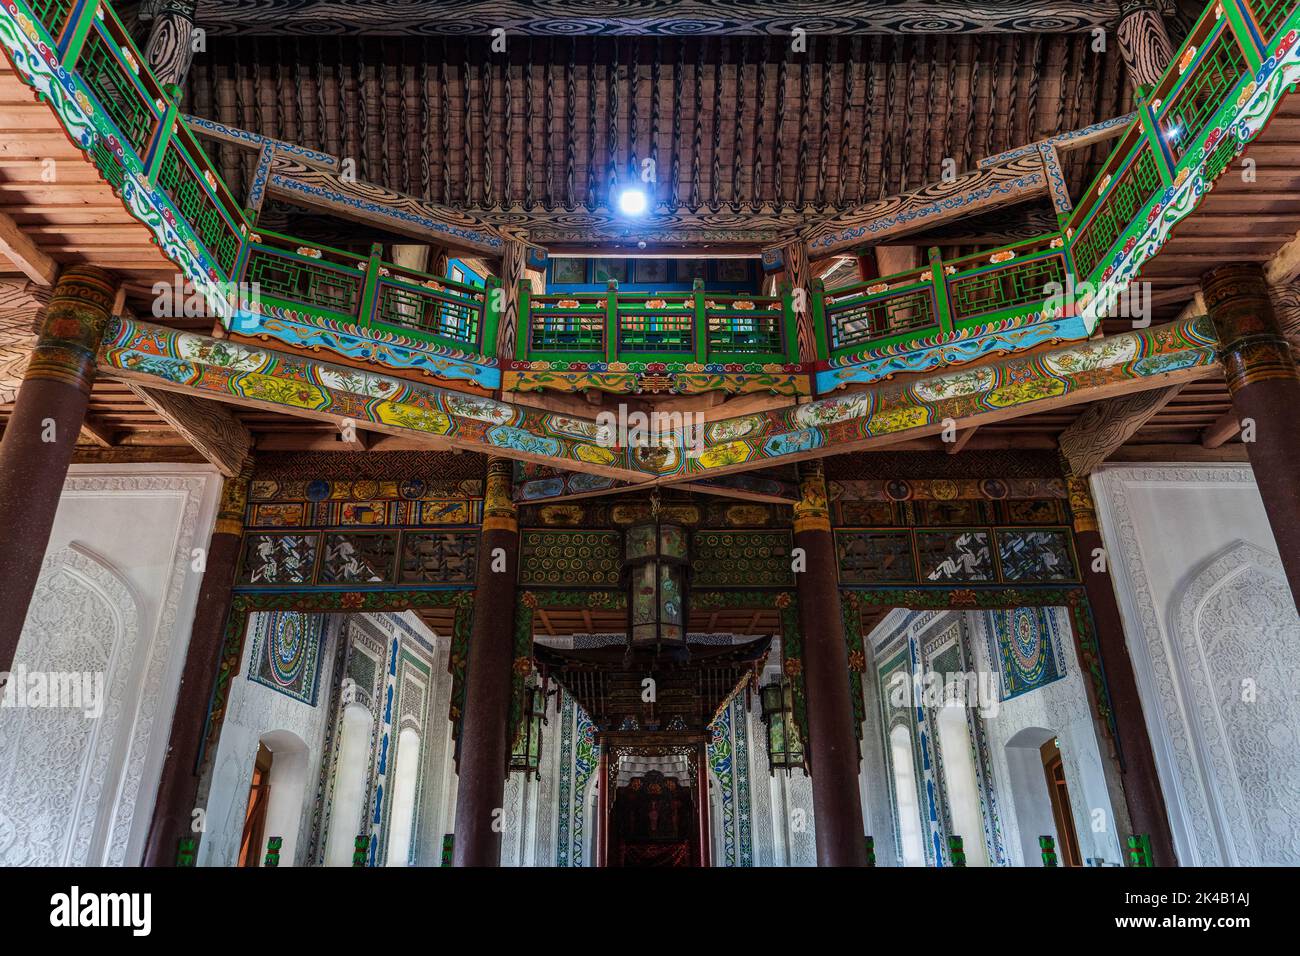 Colourful interior timber hall and structure of Chinese Dungan Uyghur Mosque in Zharkent, Kazakhstan Stock Photo